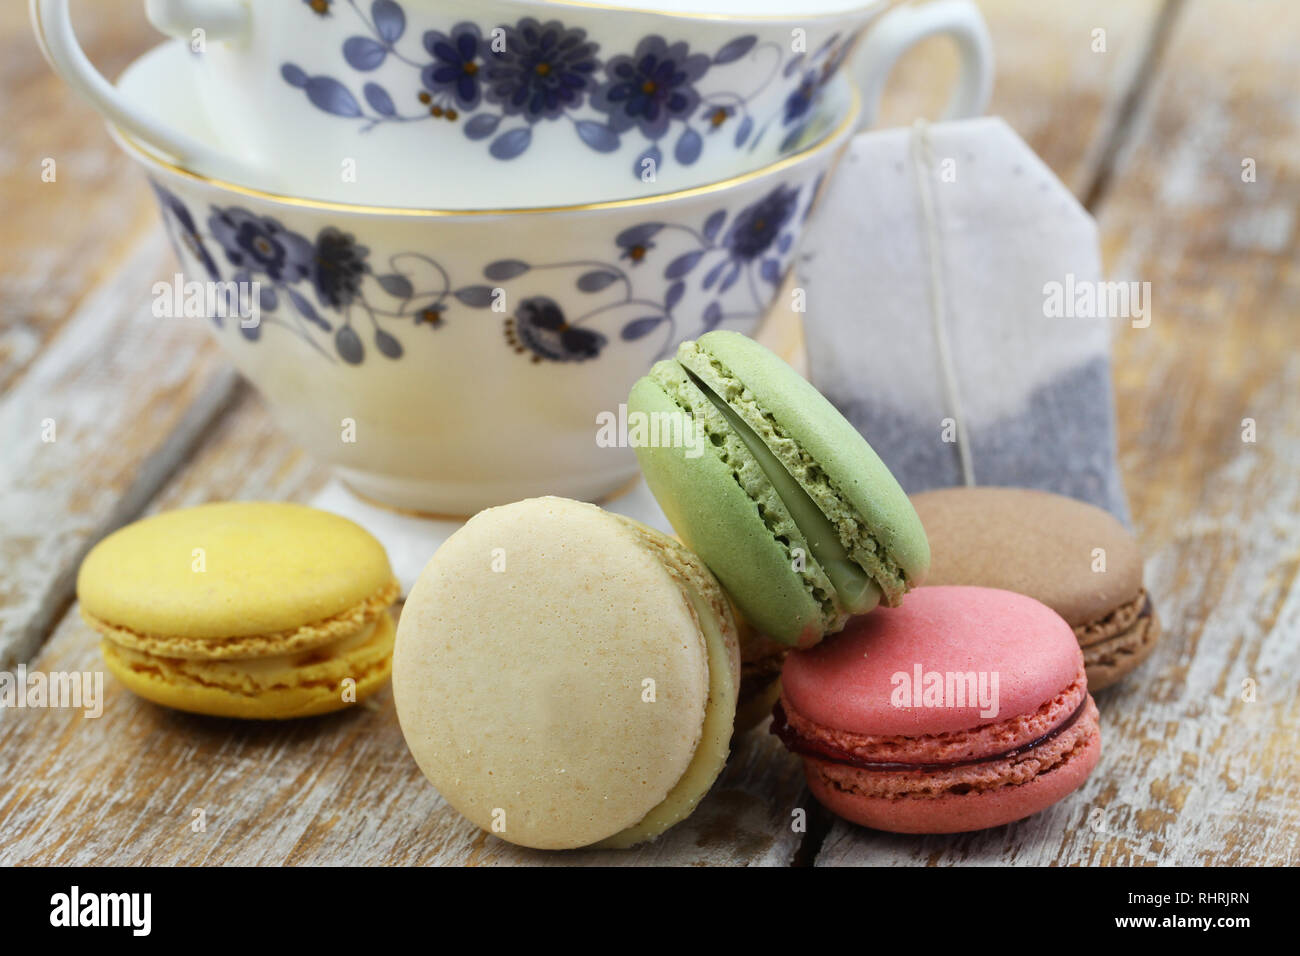 Stack of colorful crunchy macaroons on rustic wooden surface Stock Photo